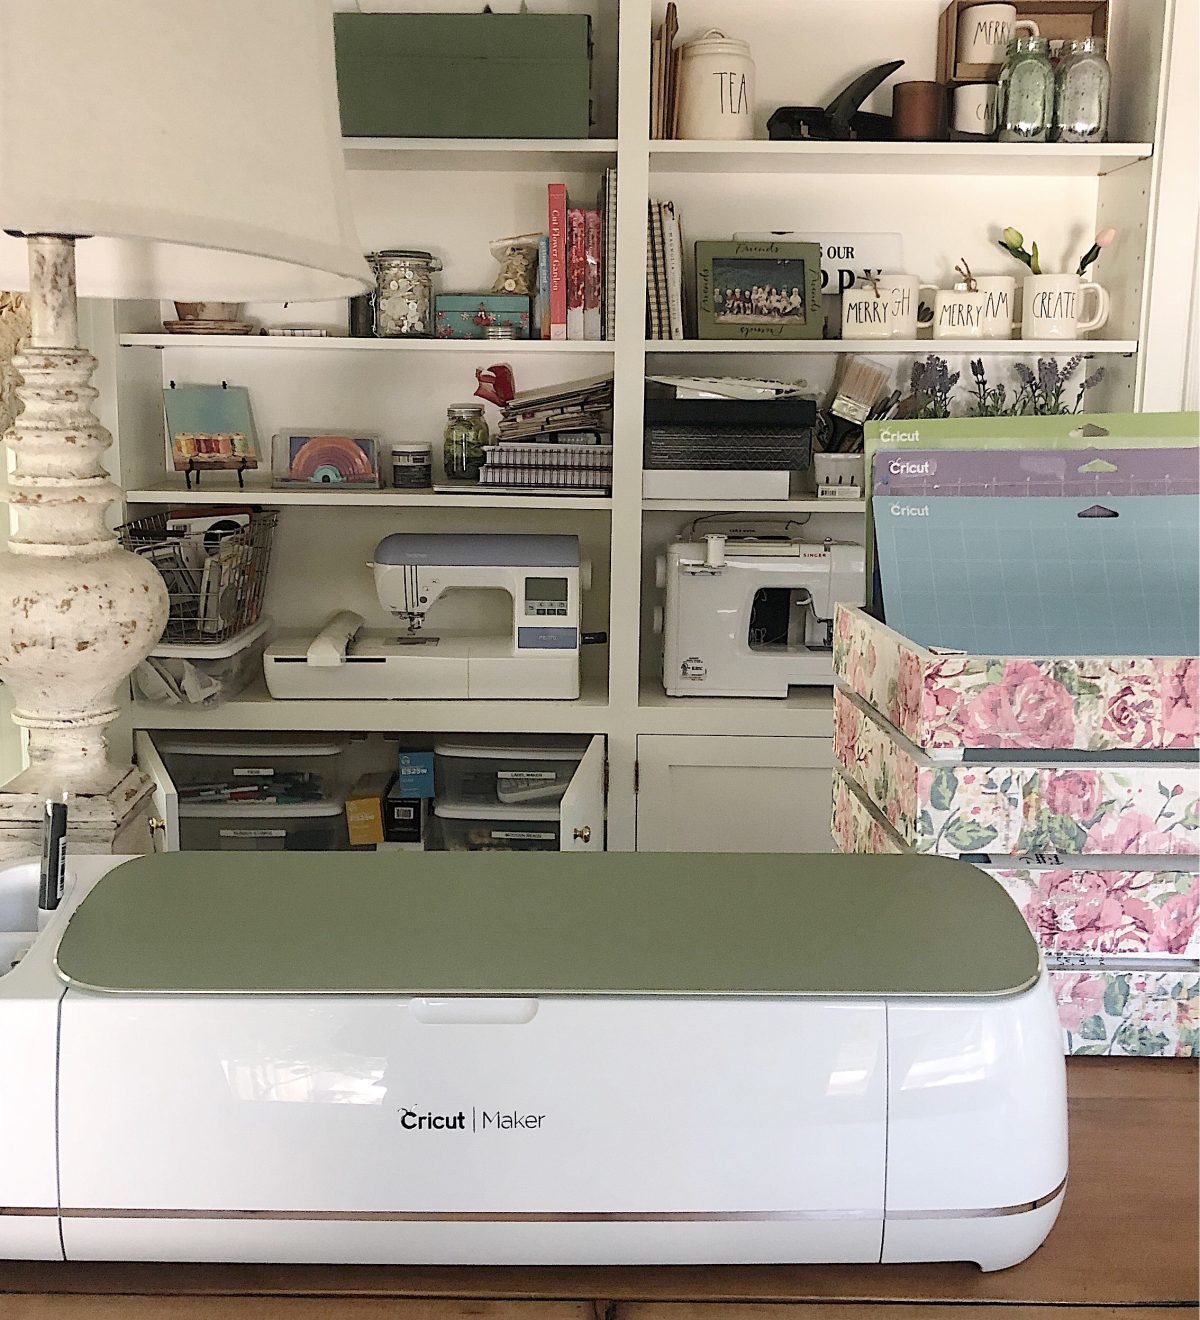 How to Cut Felt with a Cricut - At Charlotte's House